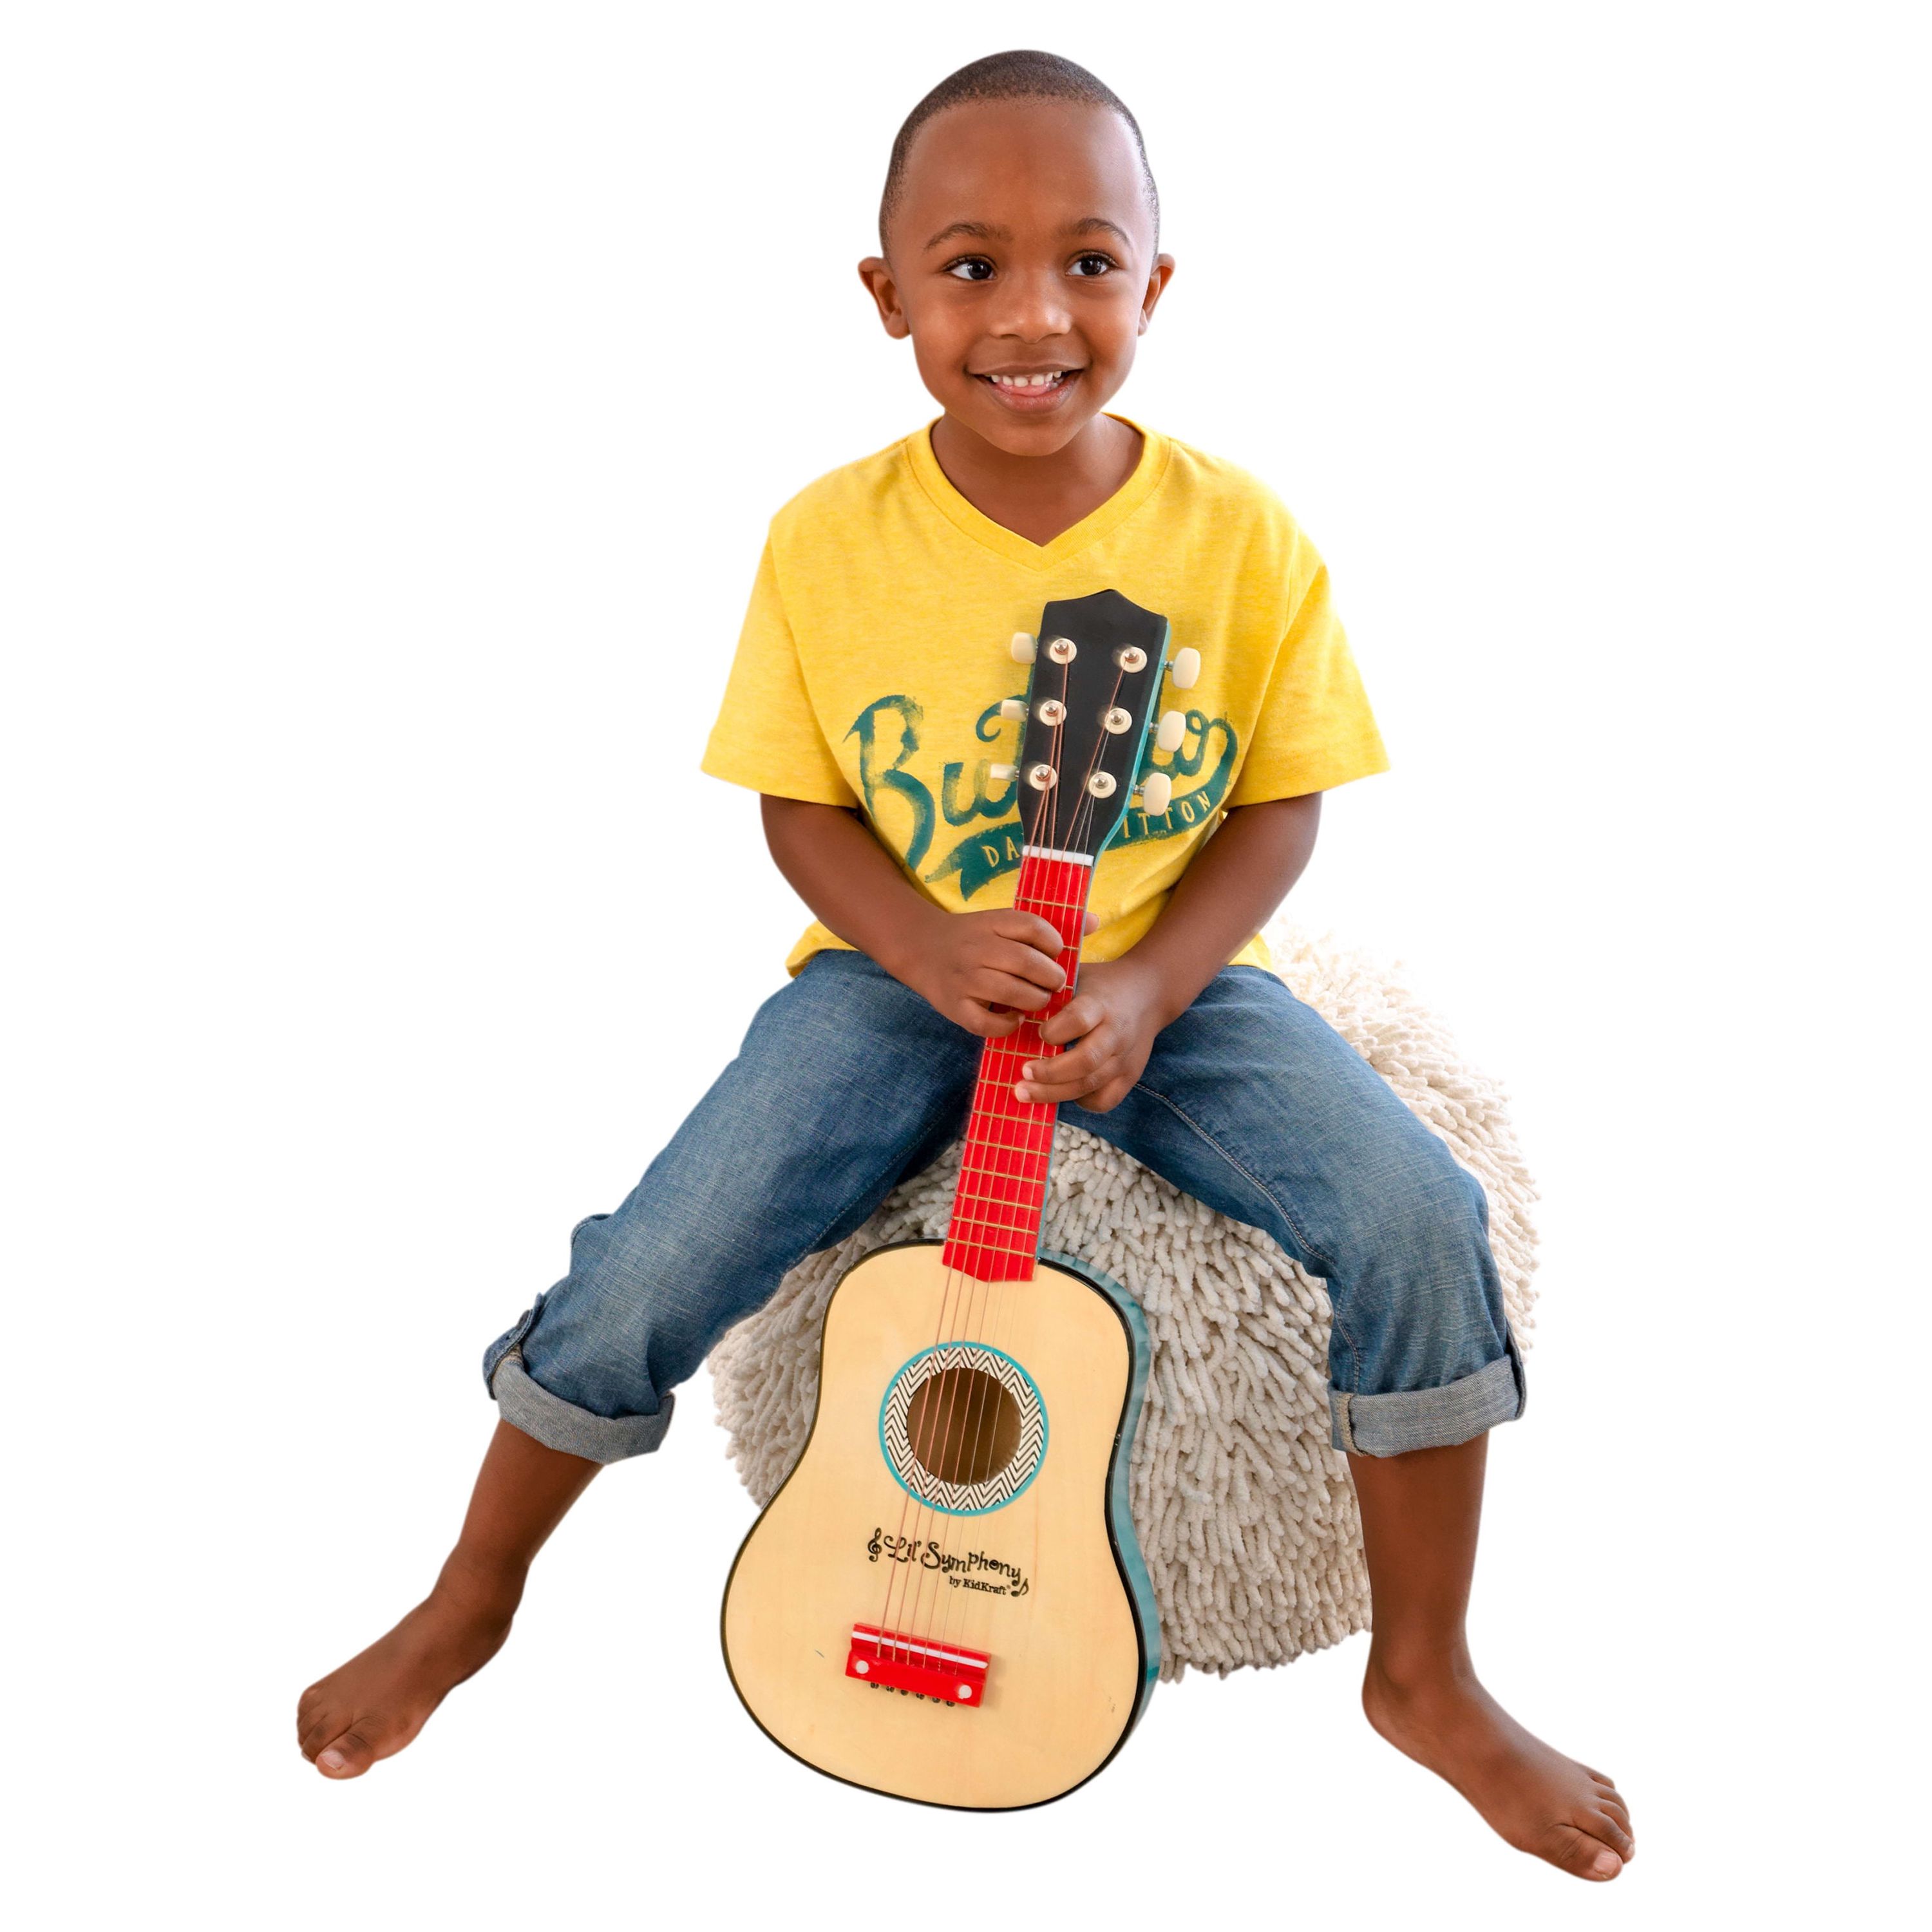 KidKraft Lil' Symphony Wooden Play Guitar, Kids Musical Instrument Toy with Real Strings - image 1 of 6